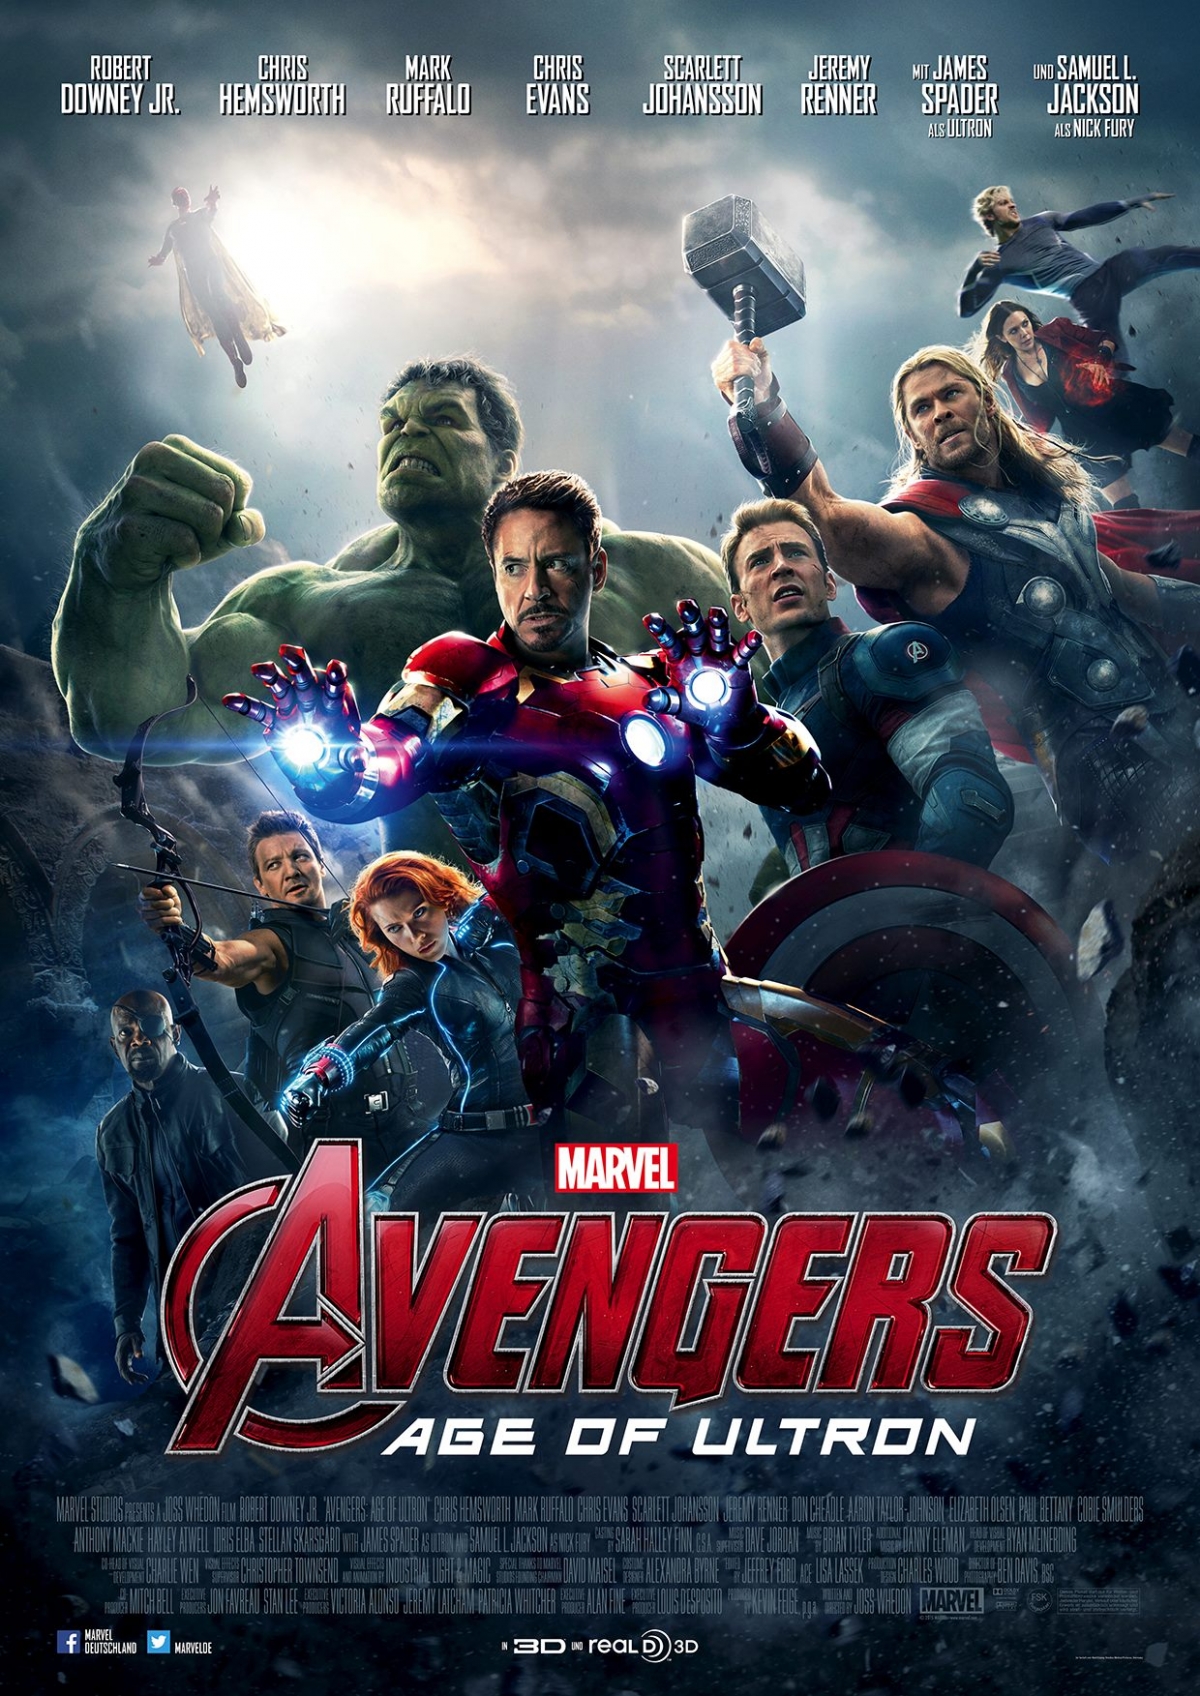 Avengers: Age of Ultron' 4 Days Collection at Indian Box Office: Superhero  Film Shows 50% Drop on Monday - IBTimes India